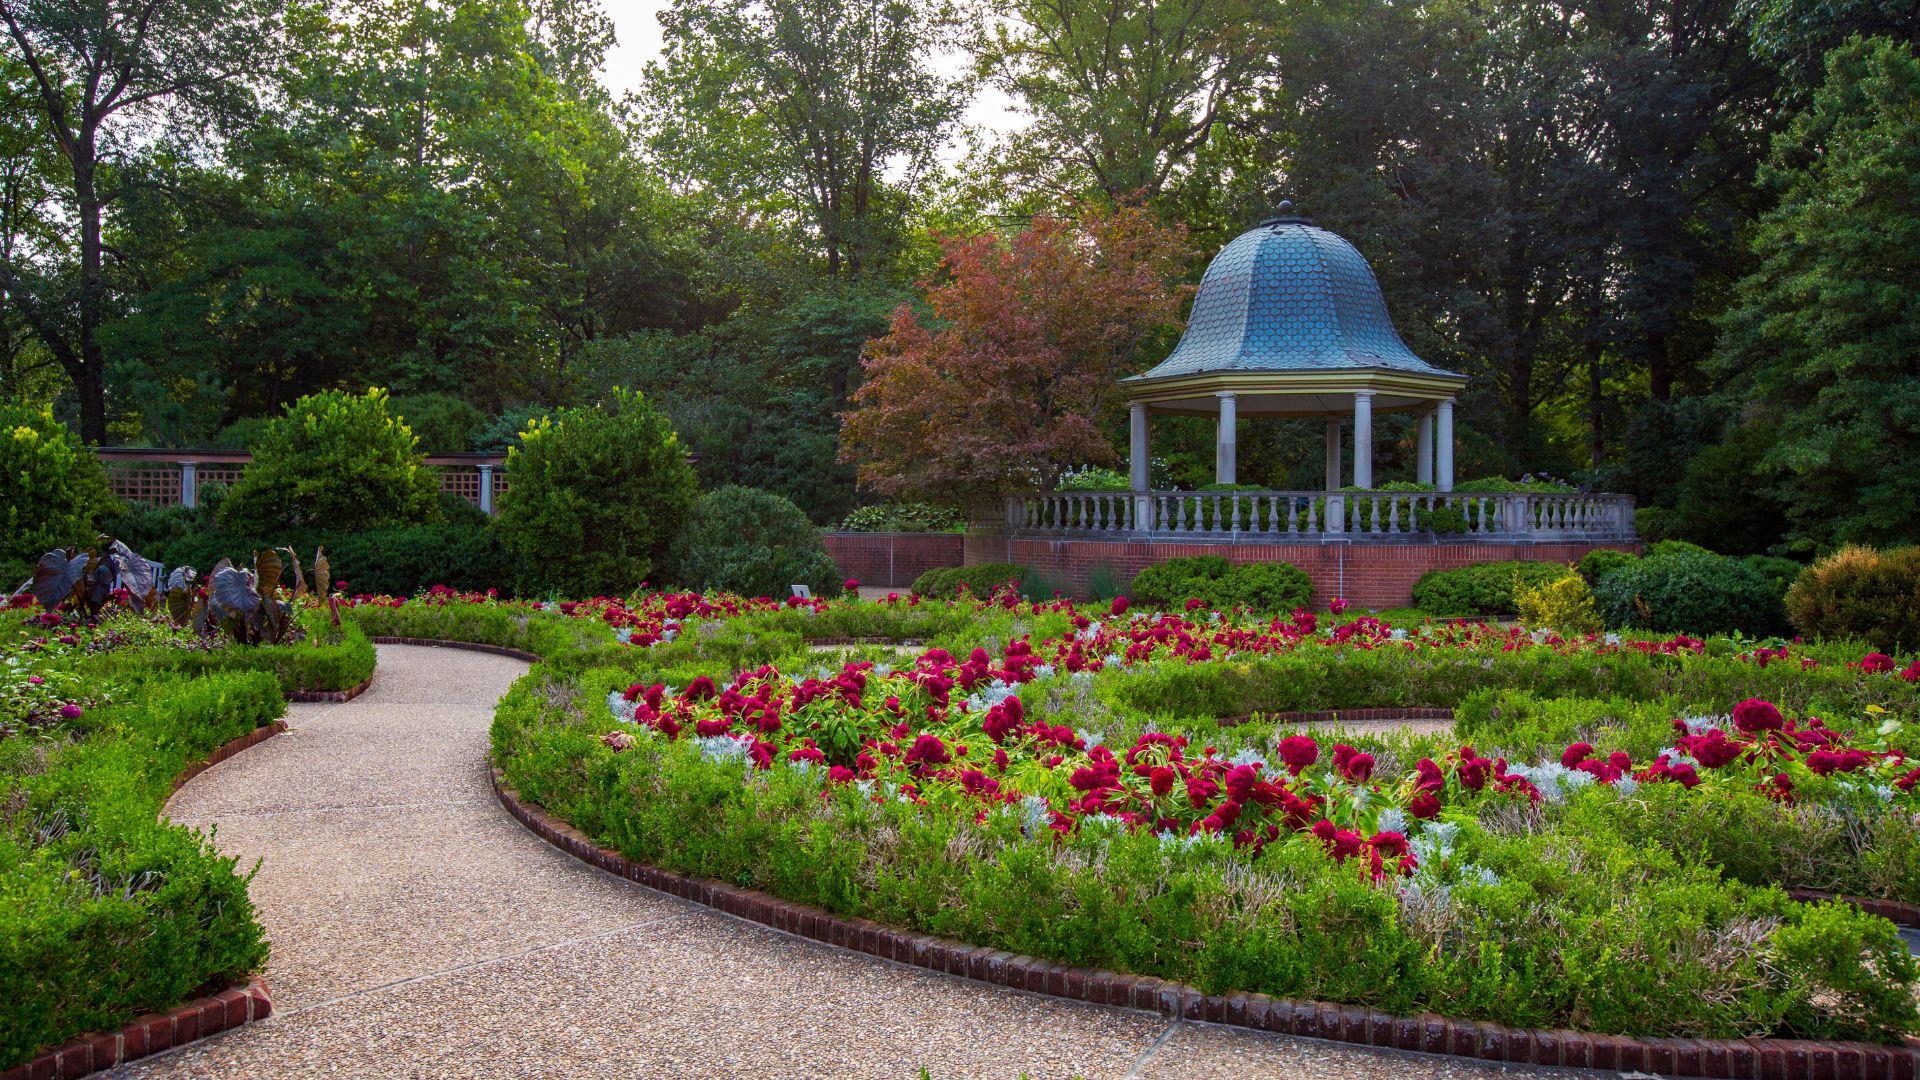 There's always something in bloom at the Missouri Botanical Garden.